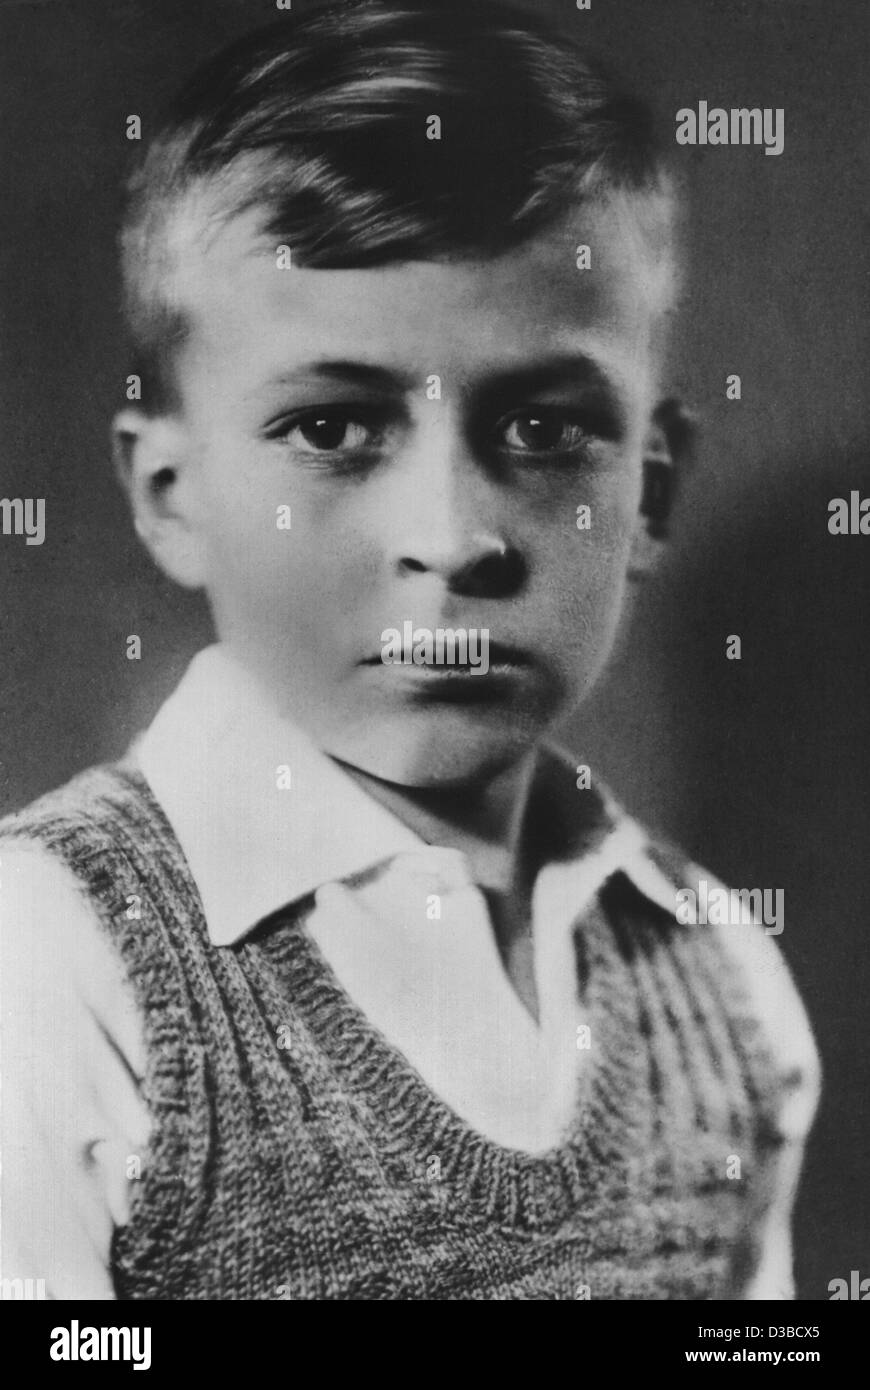 (dpa files) - A file picture shows 10-year-old Claus von Amsberg, who later became Prince of the Netherlands, pictured in Germany, 1937. On 6 October 2002 Prince Claus died at the age of 76. The husband of Her Majesty Queen Beatrix died in Amsterdam's university hospital of the progressive effects o Stock Photo